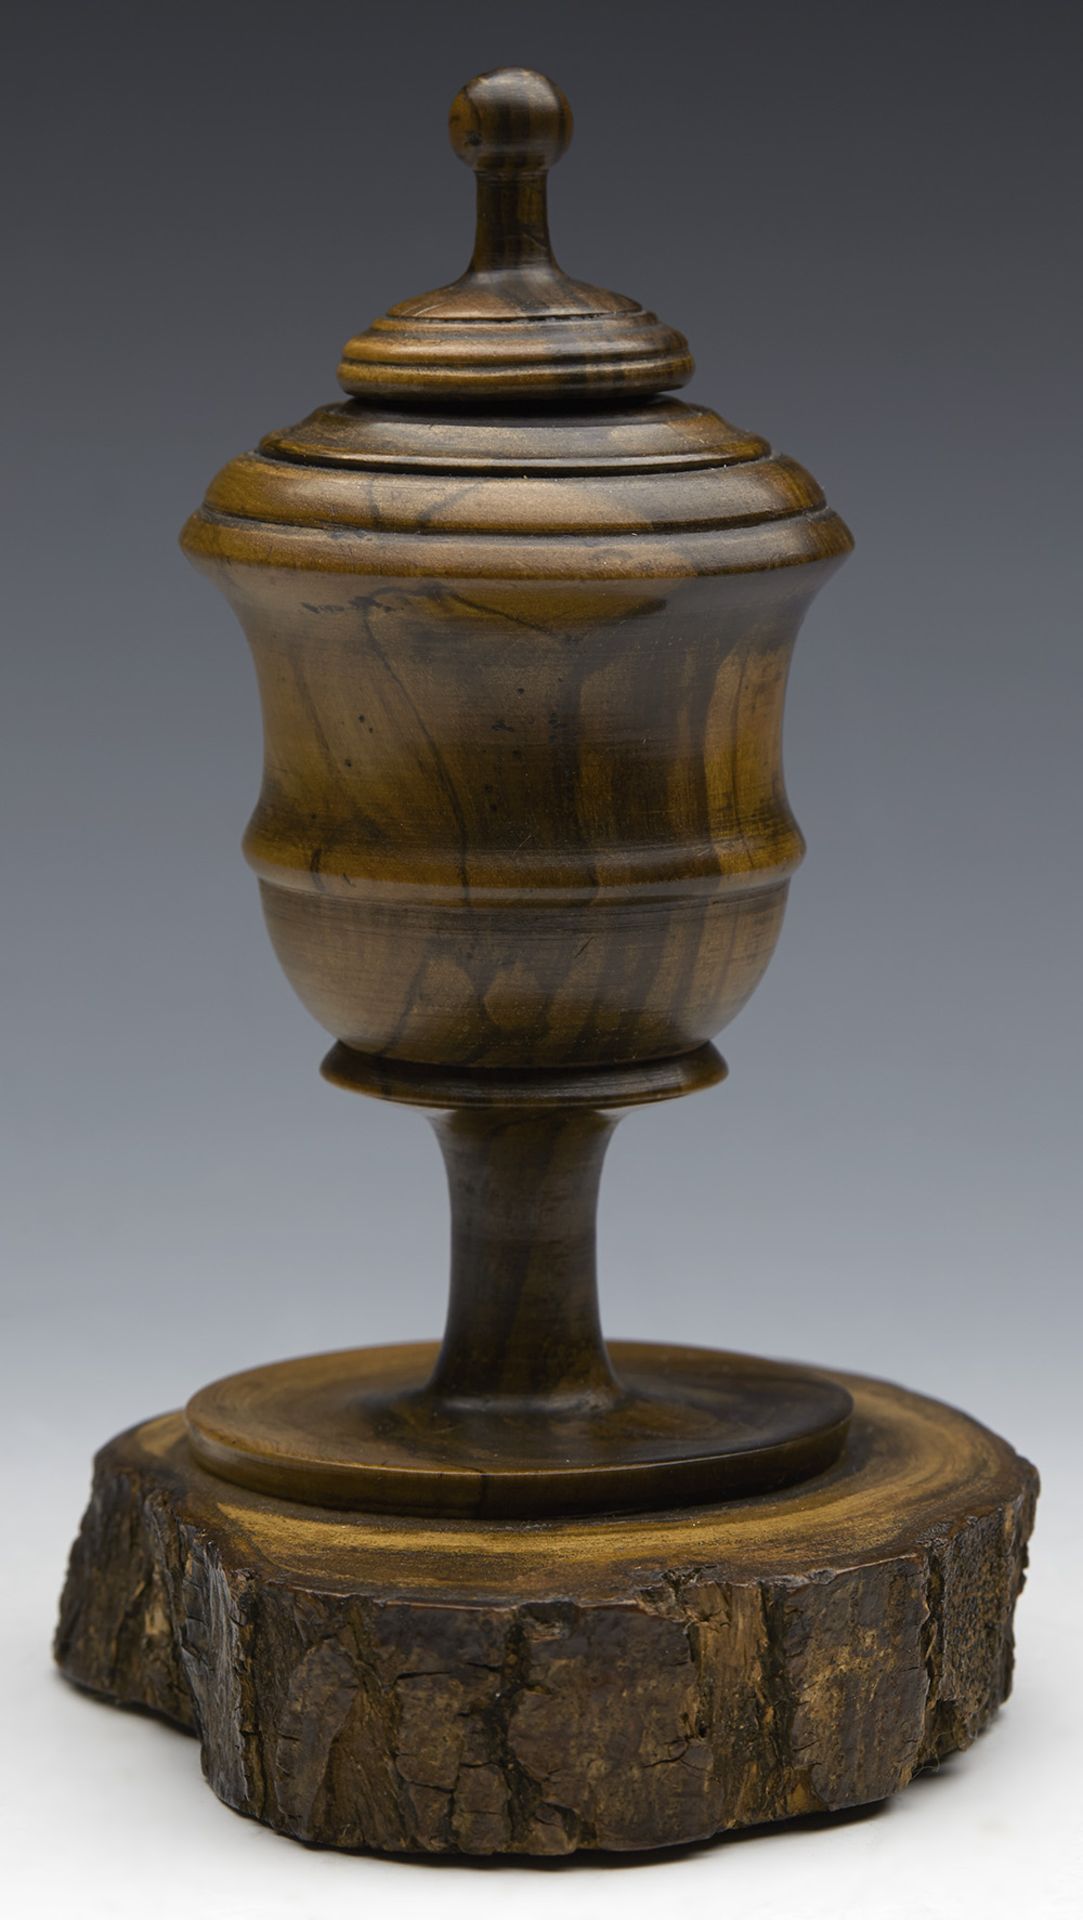 ANTIQUE FINELY HAND TURNED TREEN INKWELL 19TH C. - Image 7 of 7